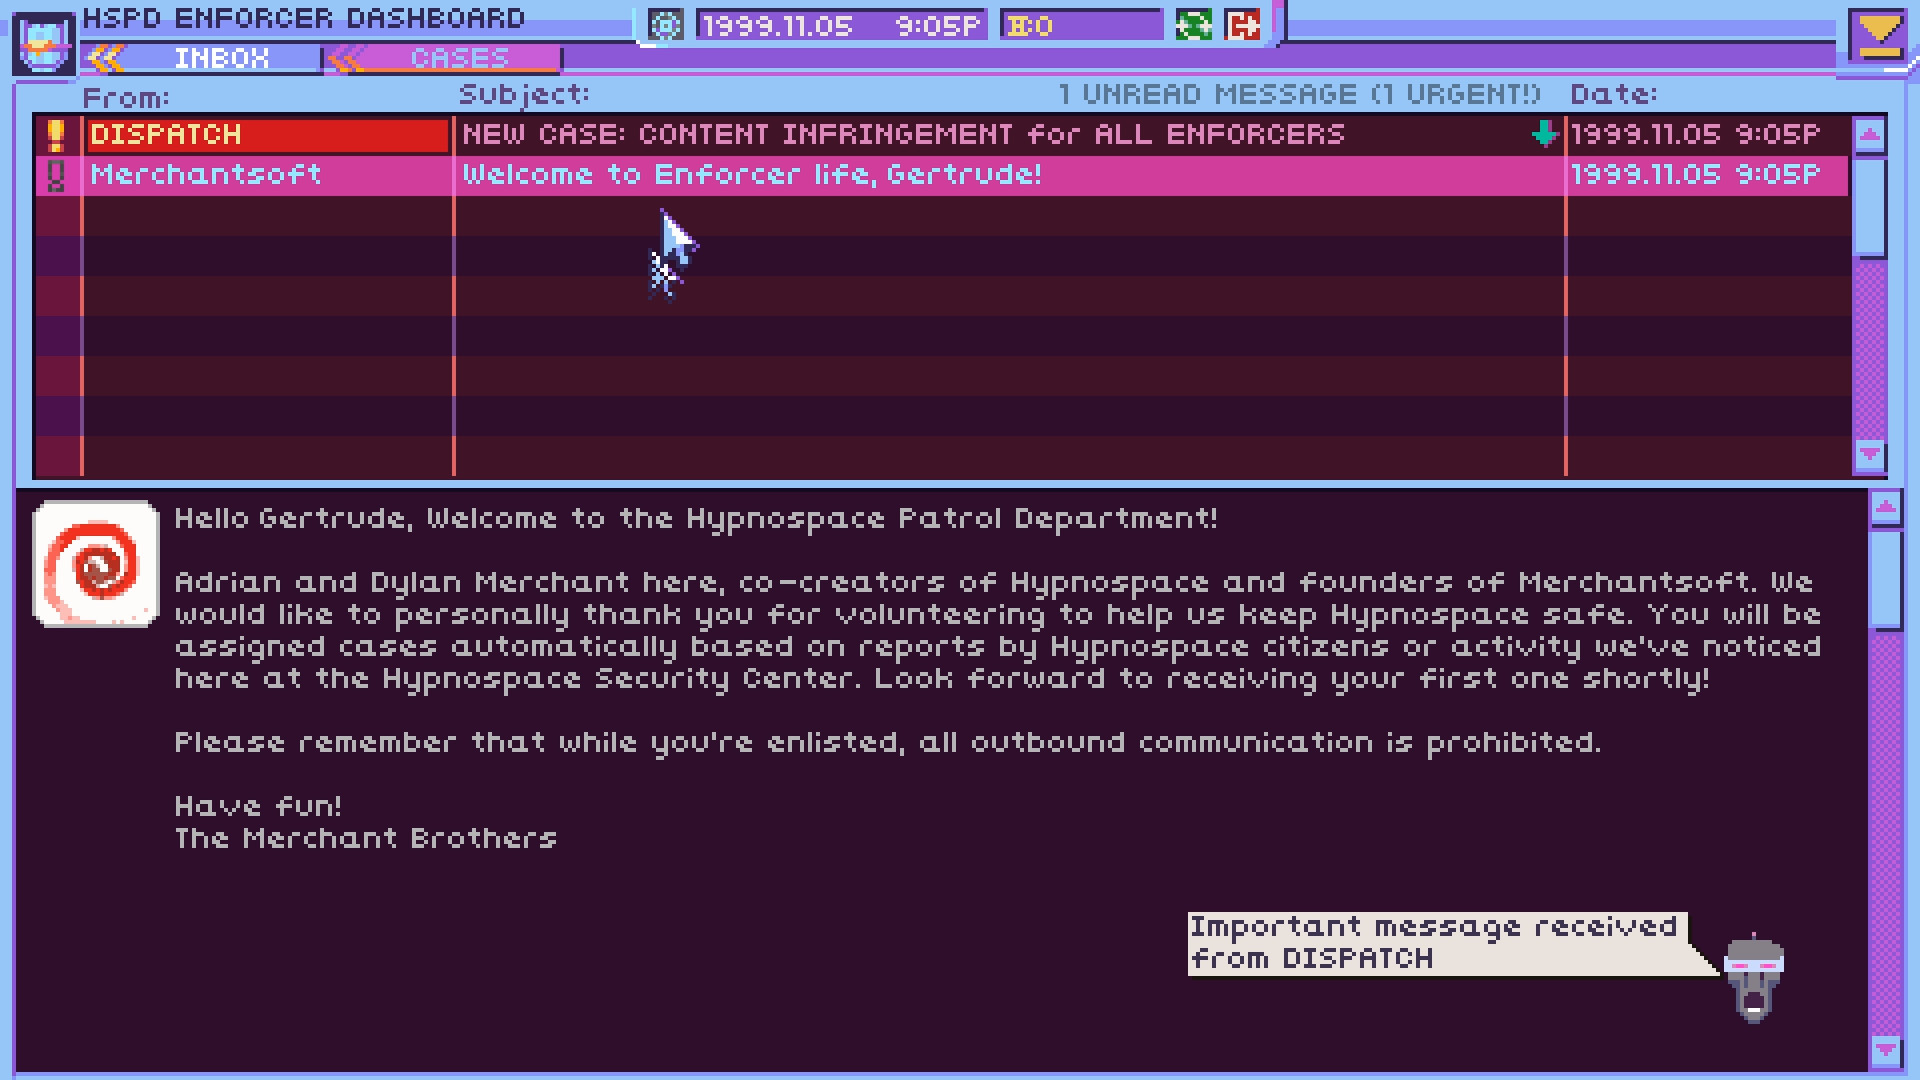 hypnospace outlaws freelands